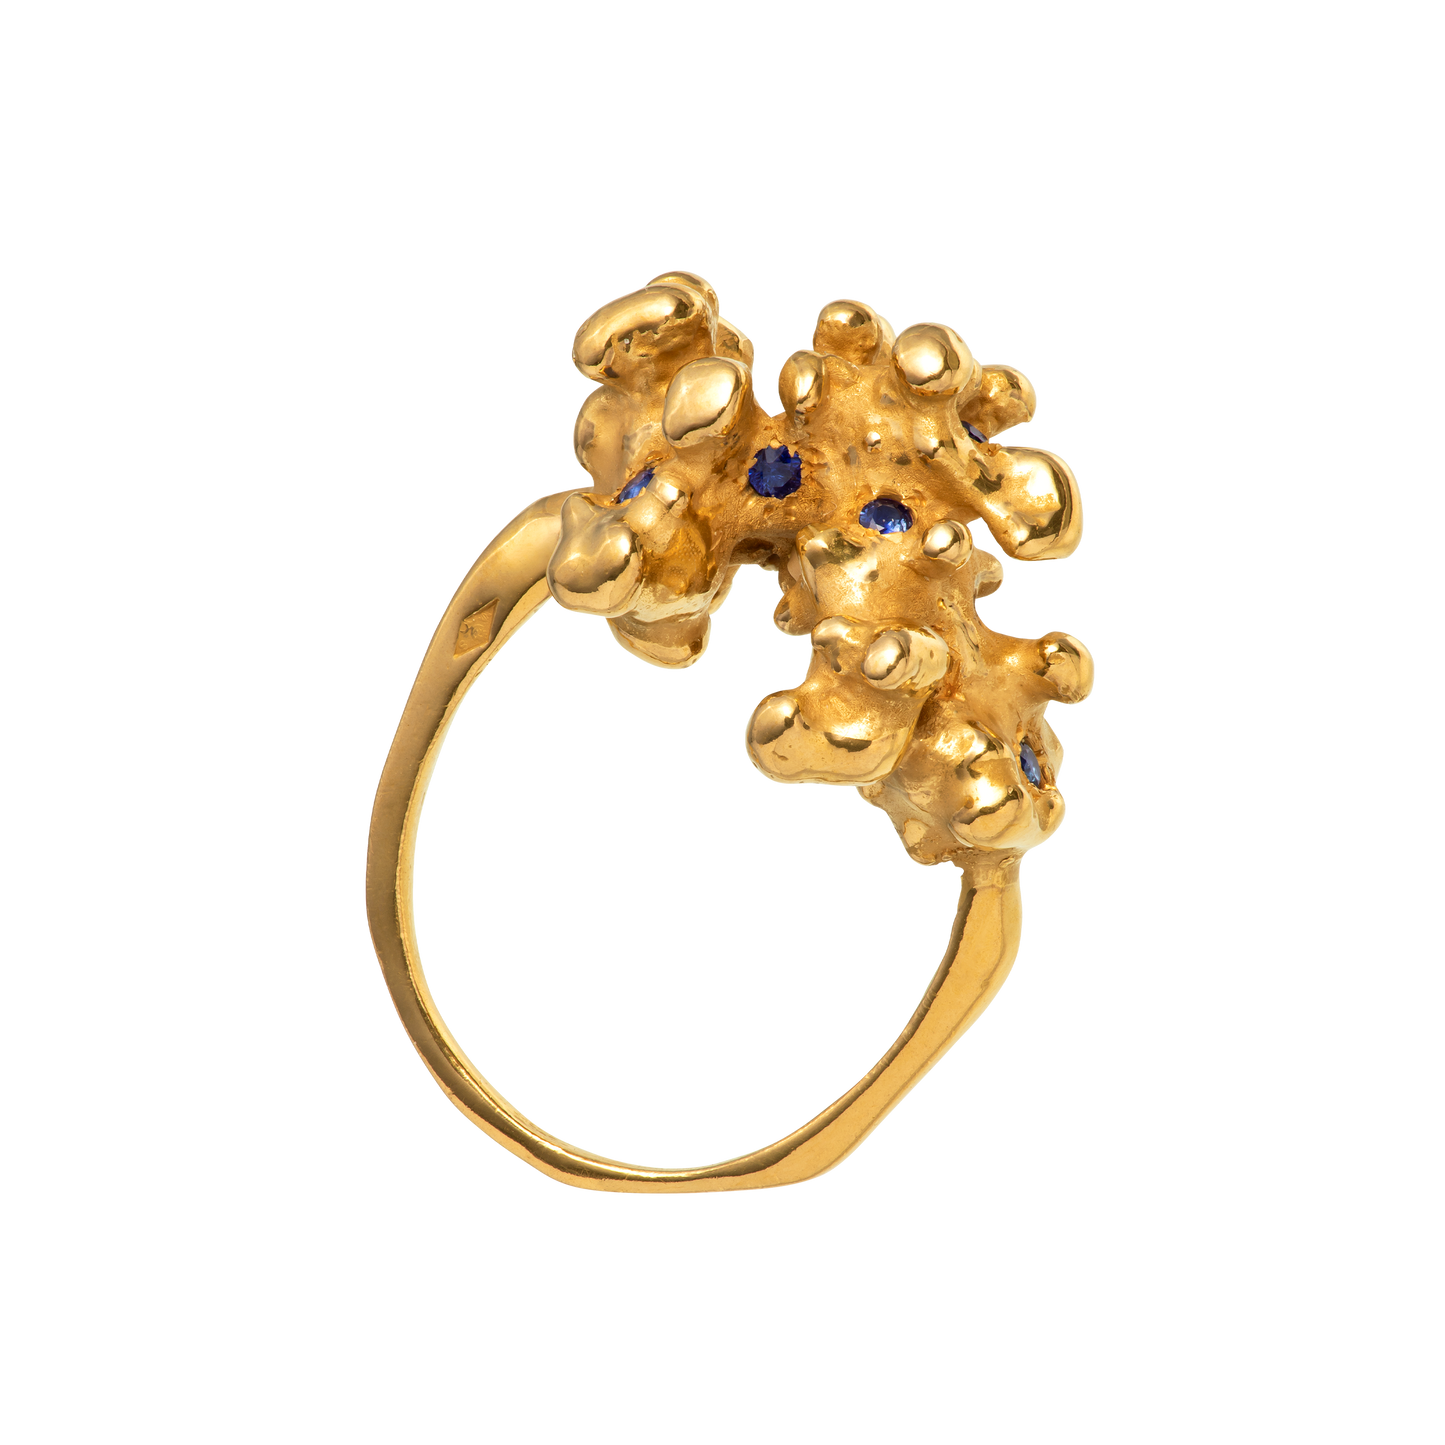 A gold ring made from a cast of a fragment of coral as set with 10 blue sapphires. Handmade by Violette Stehli.